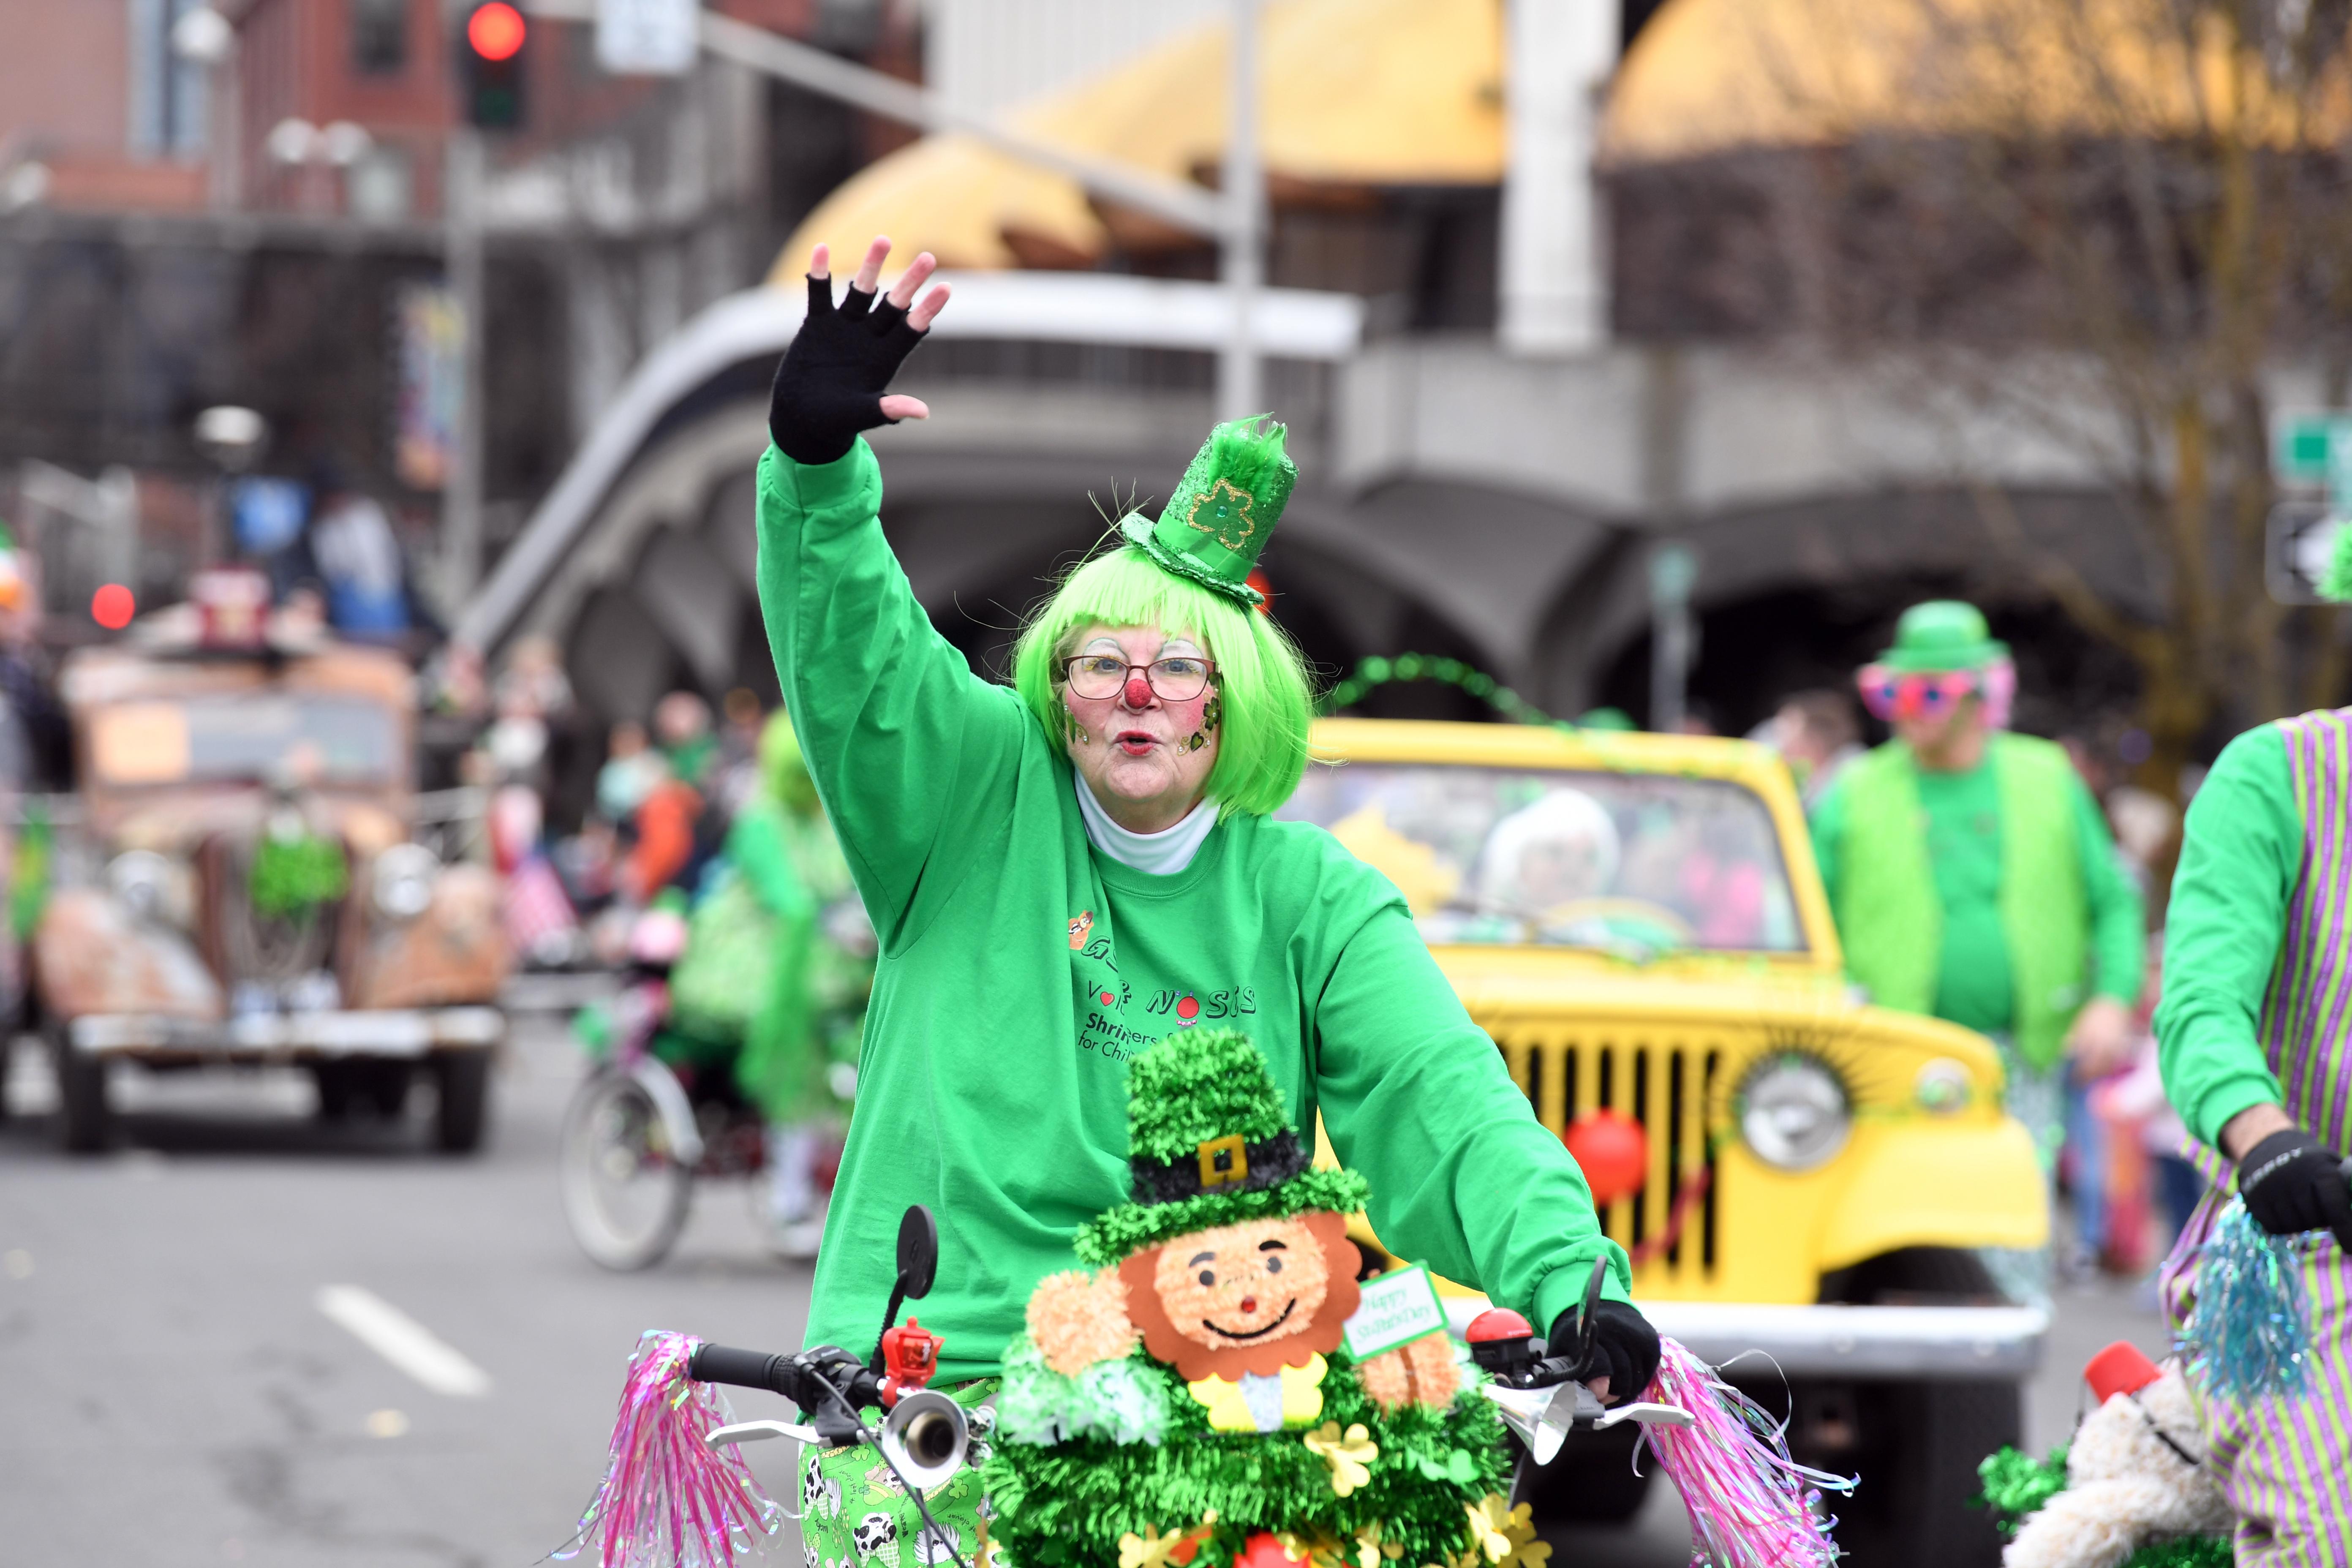 St. Patrick's Day Parade Clipart / Happy St. Patrick's Day to one and all ! Democratic A